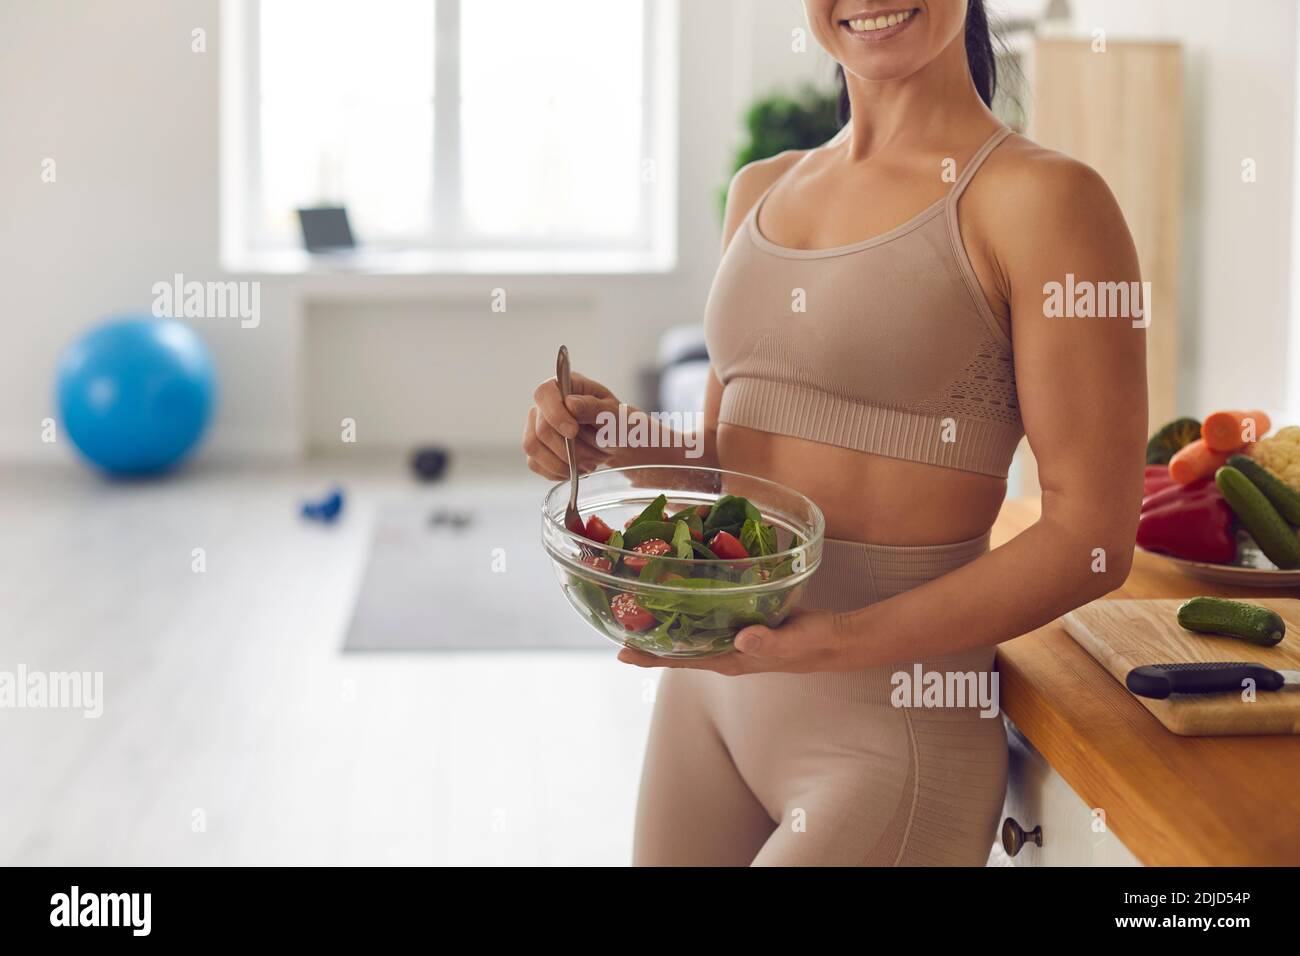 Active healthy lifestyle, clean eating concept Stock Photo